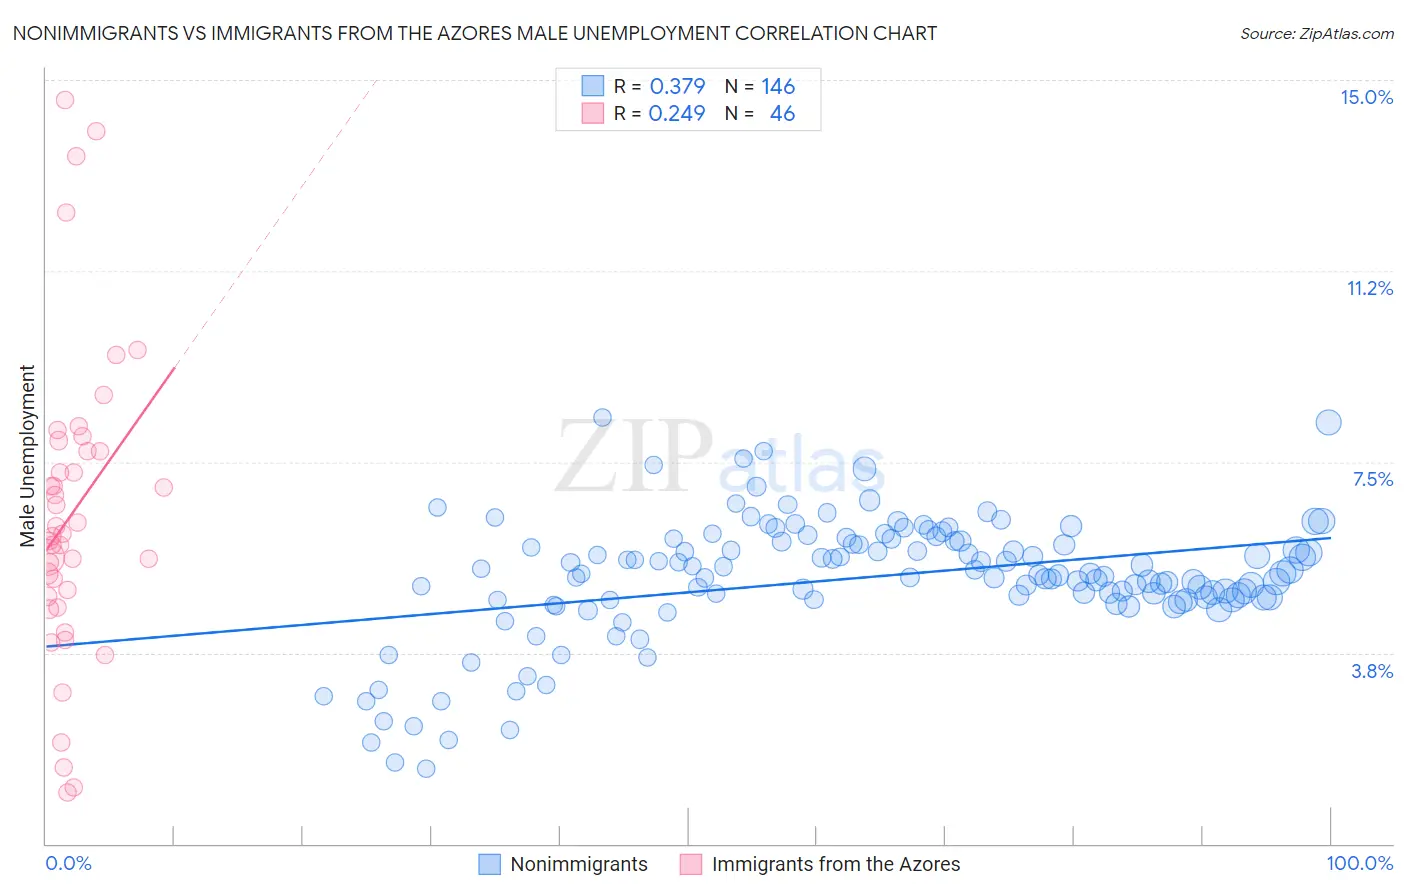 Nonimmigrants vs Immigrants from the Azores Male Unemployment